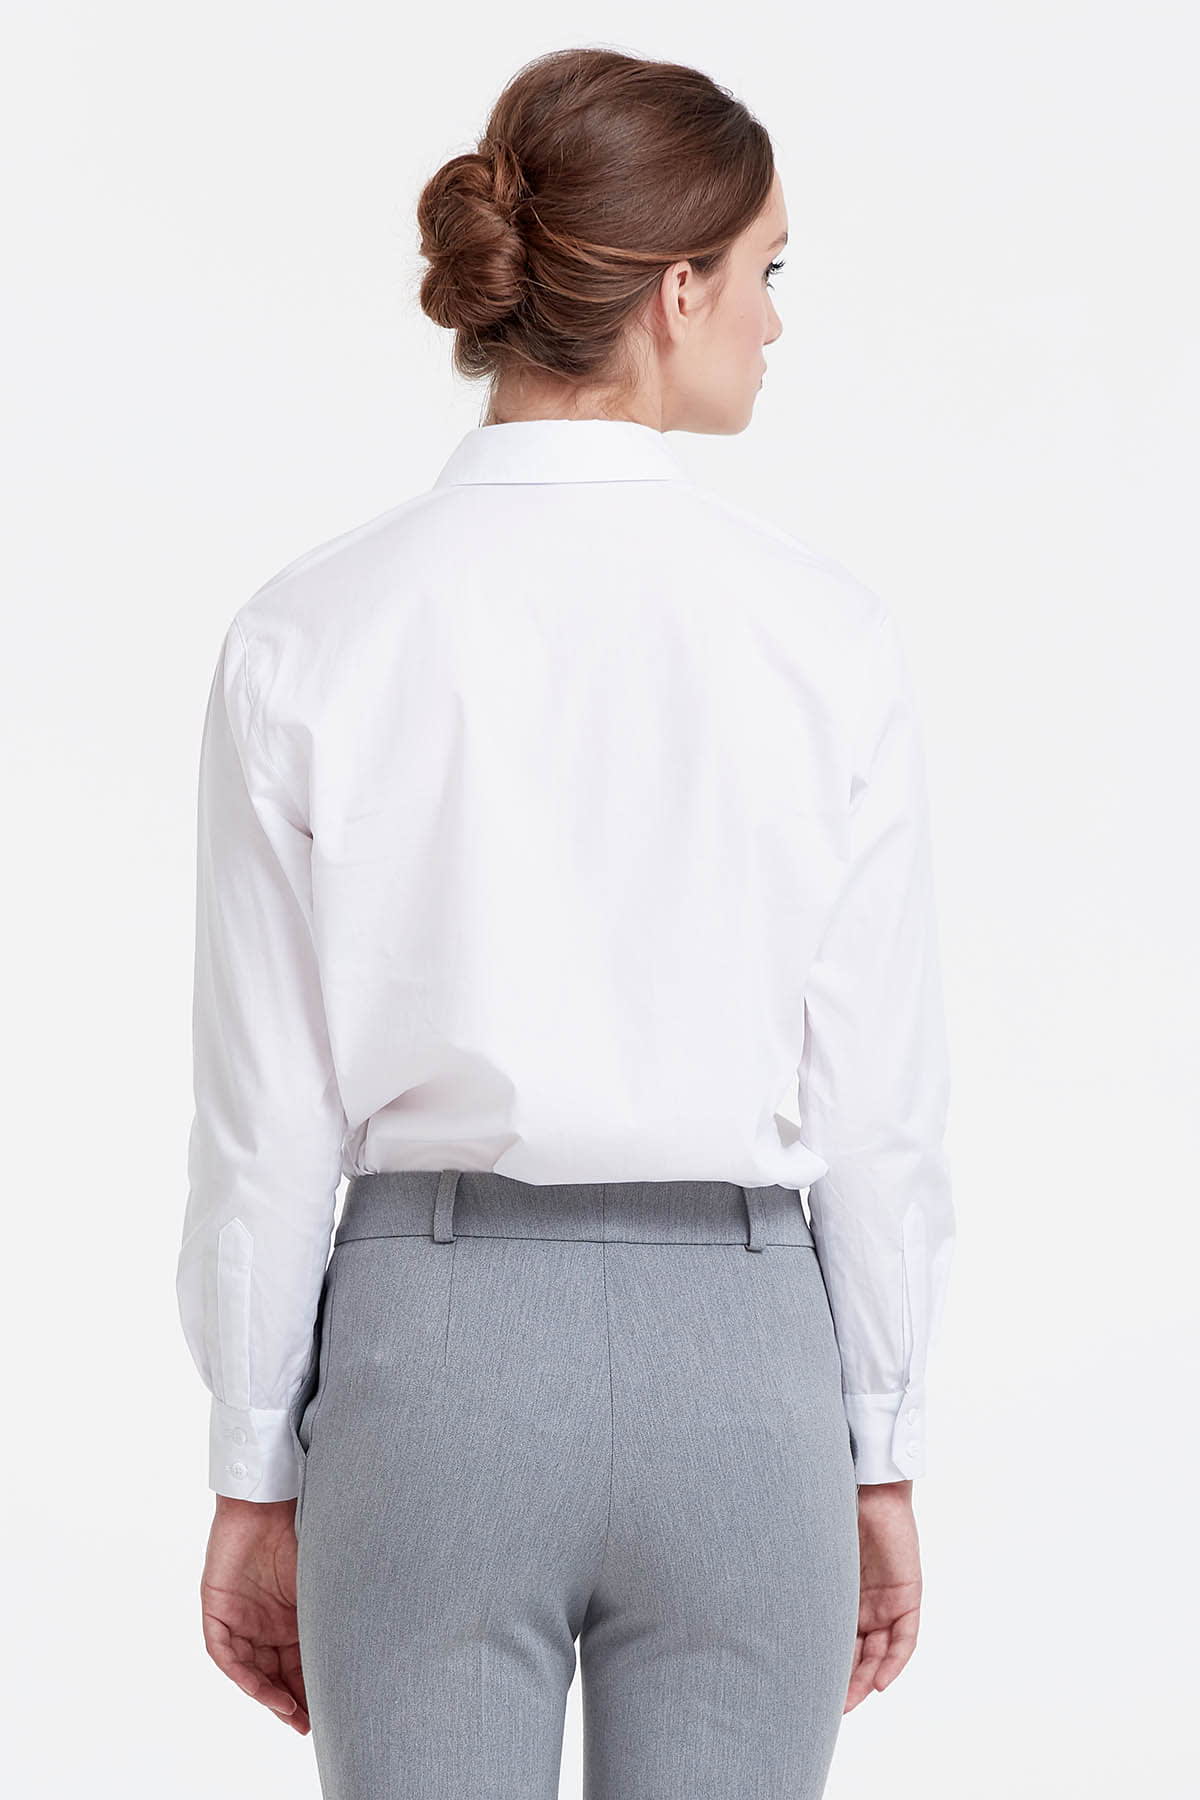 White shirt with a pocket , photo 5